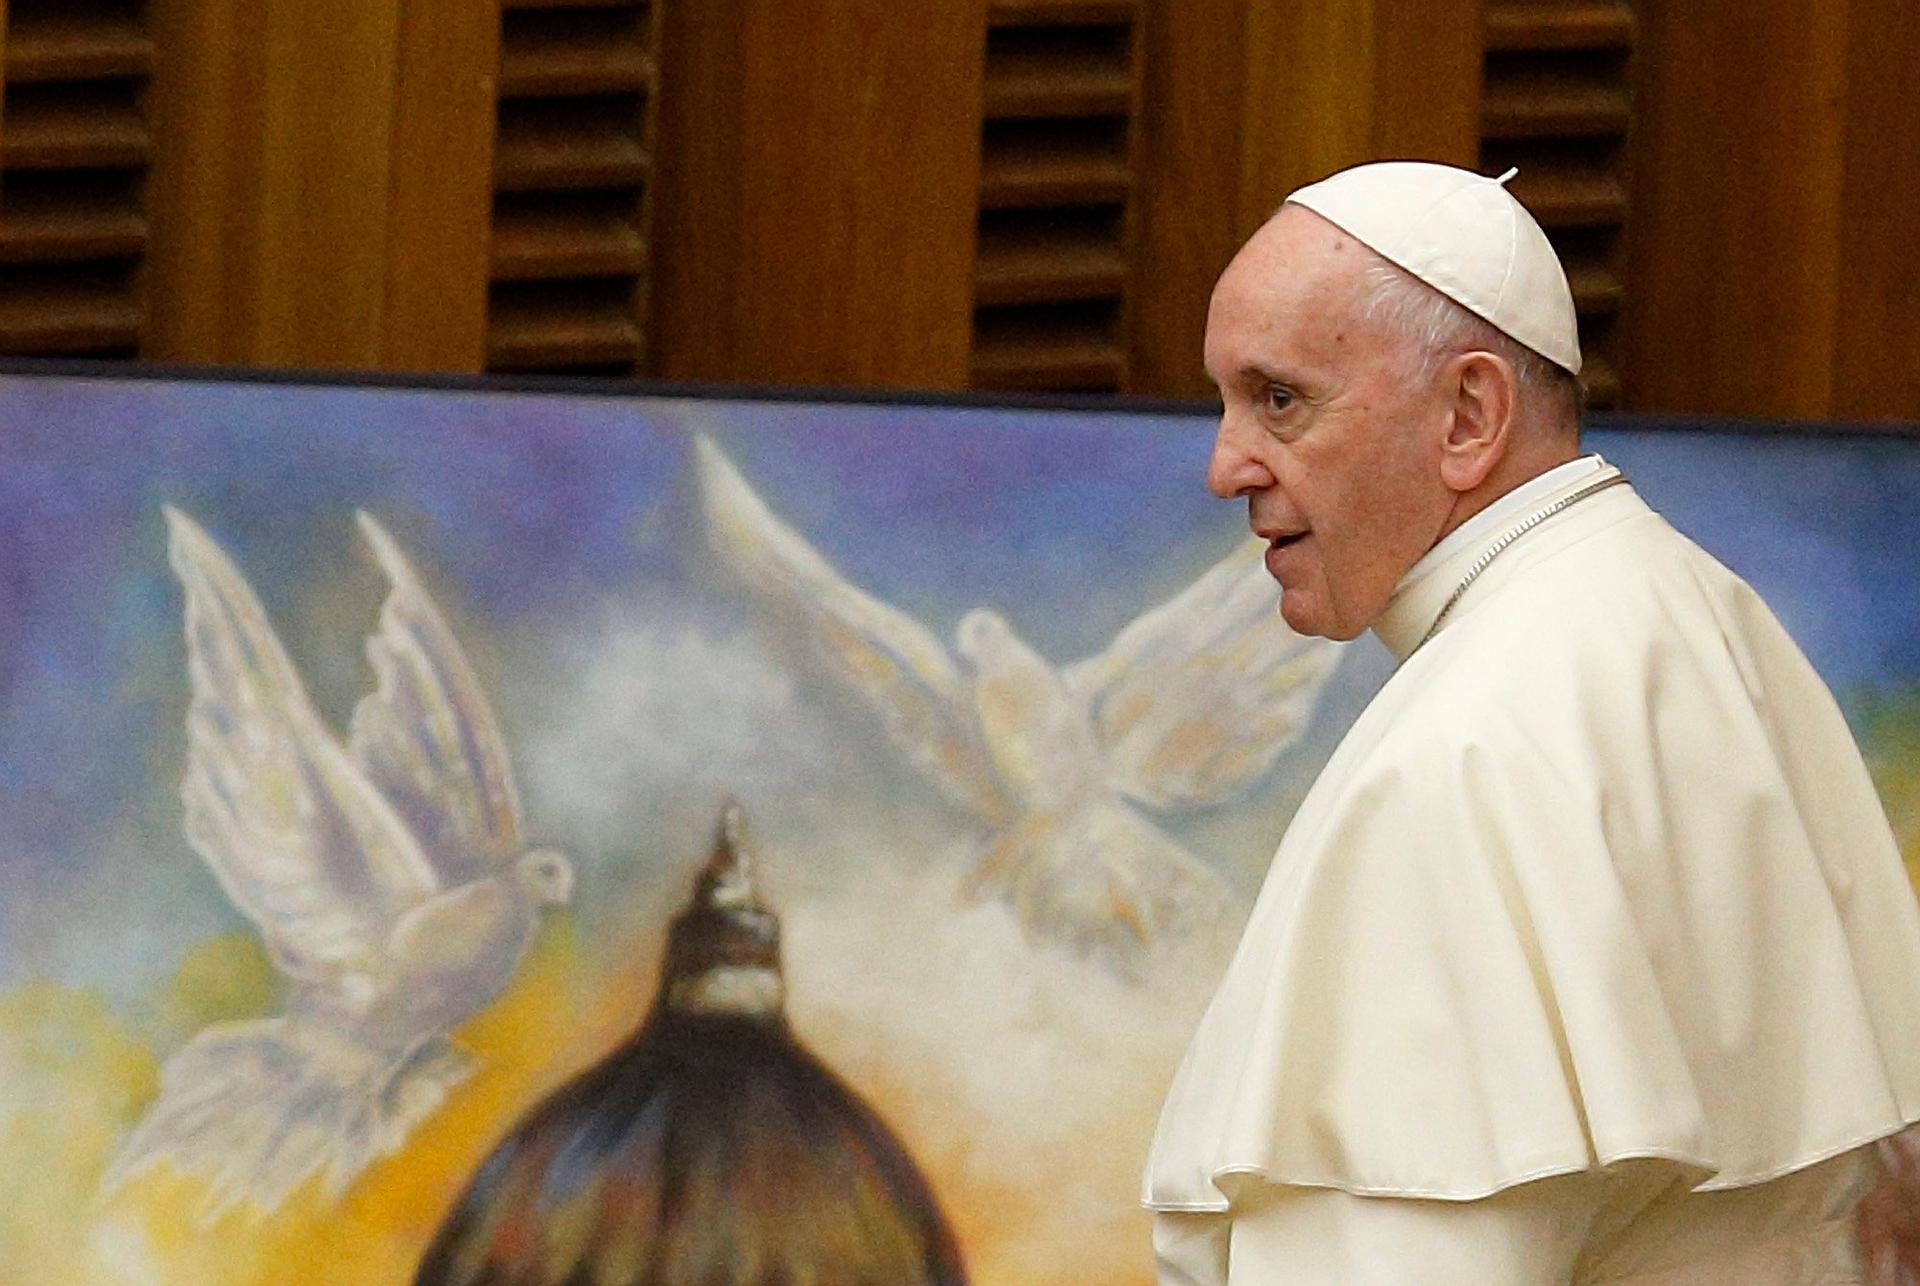 Scottish bishops would ‘warmly welcome’ Pope Francis to UN climate summit